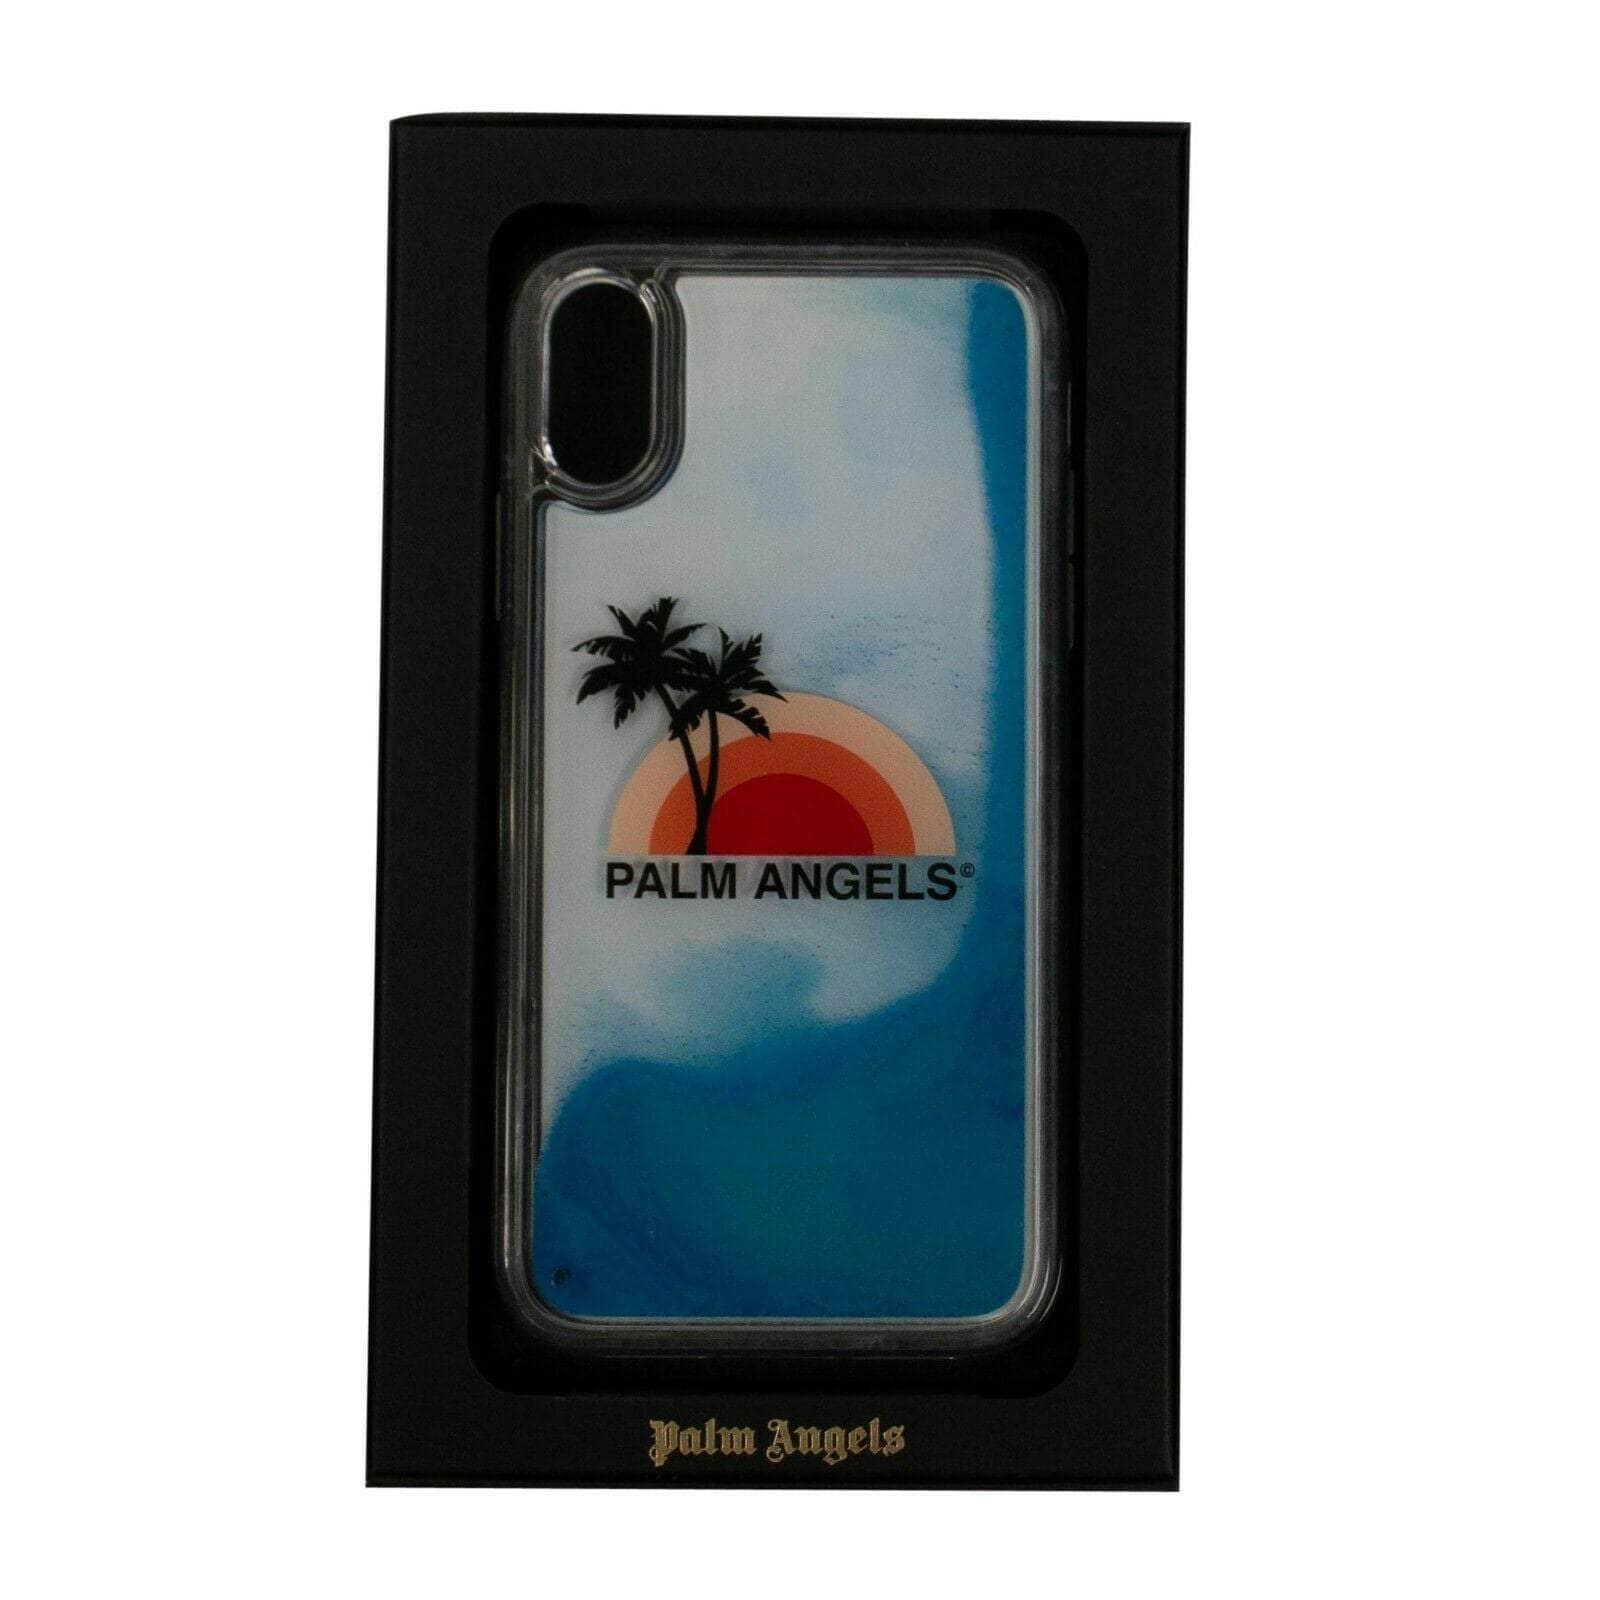 Palm Angels channelenable-all, chicmi, couponcollection, gender-mens, main-accessories, mens-shoes, palm-angels, size-os, tech-accessories, under-250 OS Blue Sunset iPhone XR Phone Case 95-PLM-3016/OS 95-PLM-3016/OS